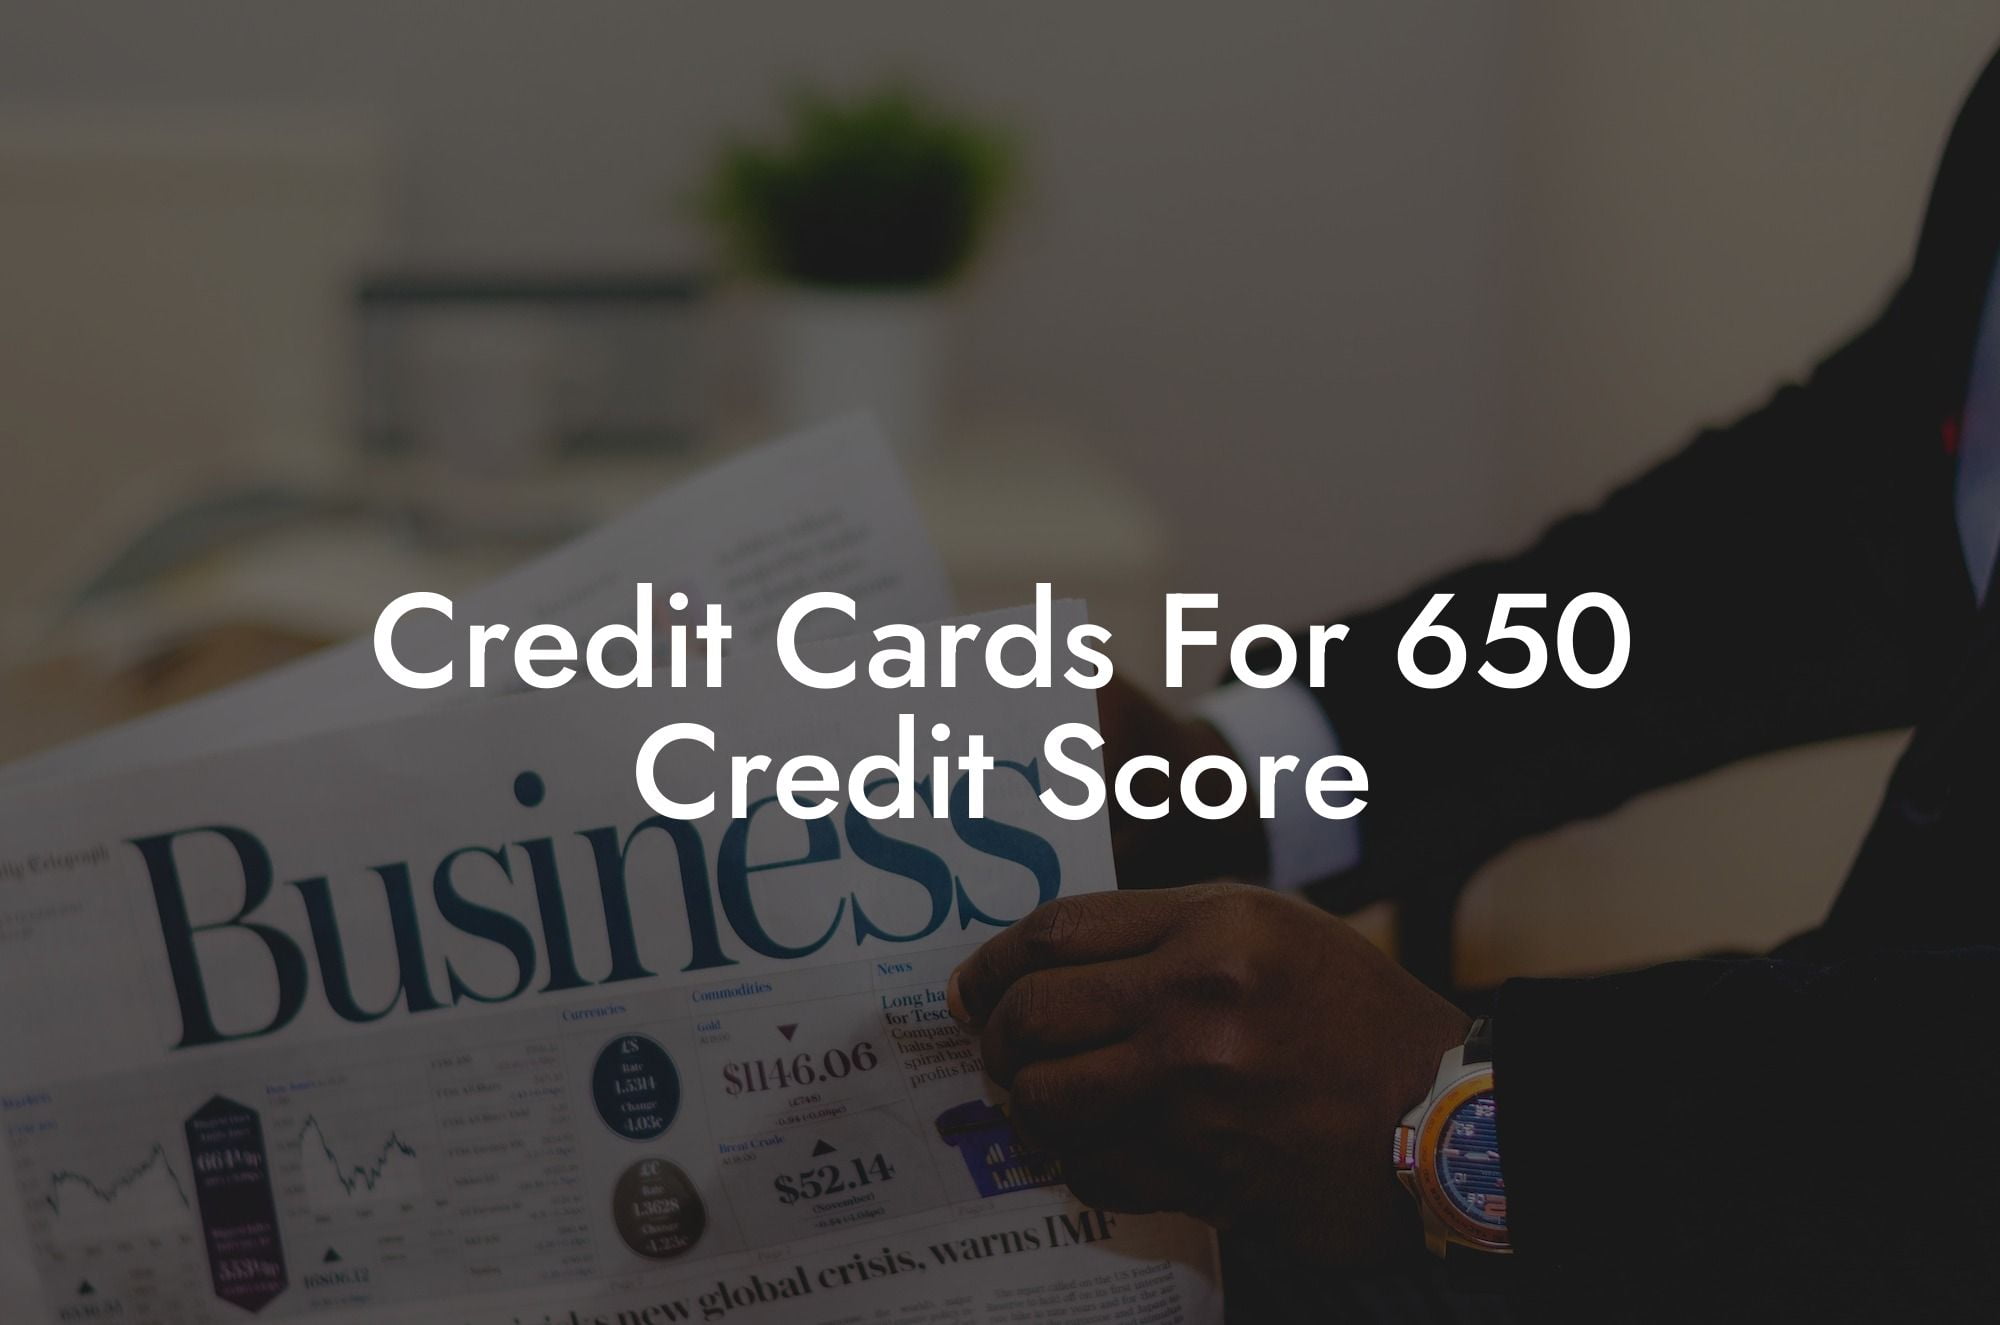 Credit Cards For 650 Credit Score